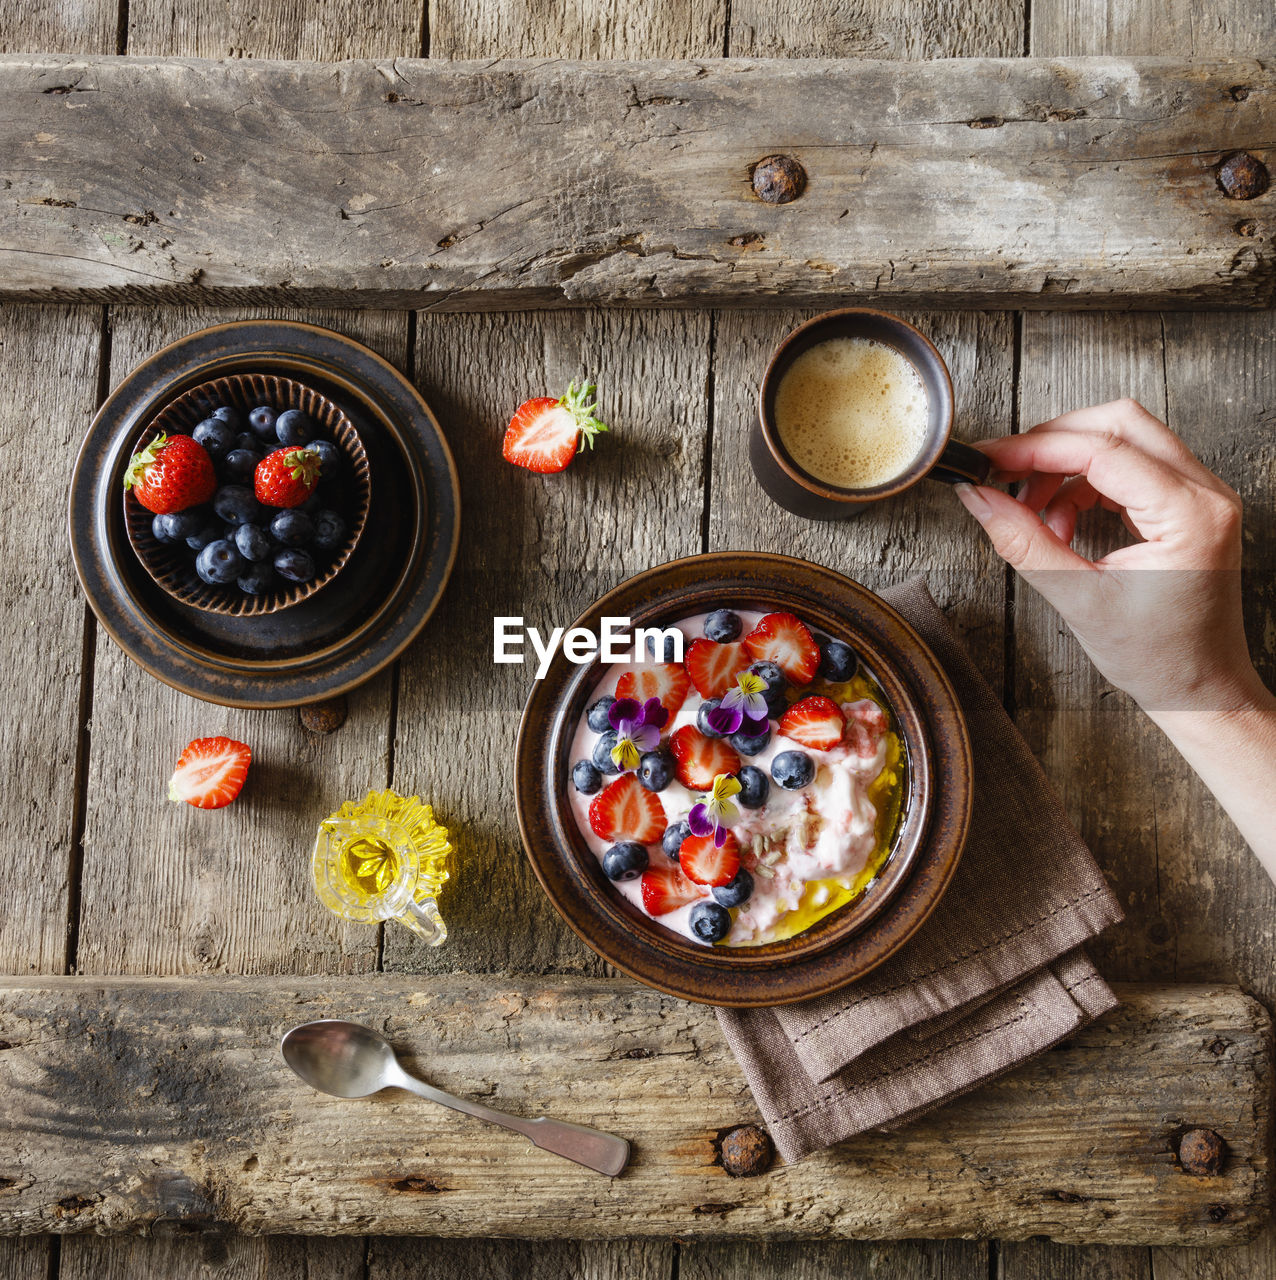 Female hand reaching for cup of coffee standing beside plate of quark with fruits and edible flowers